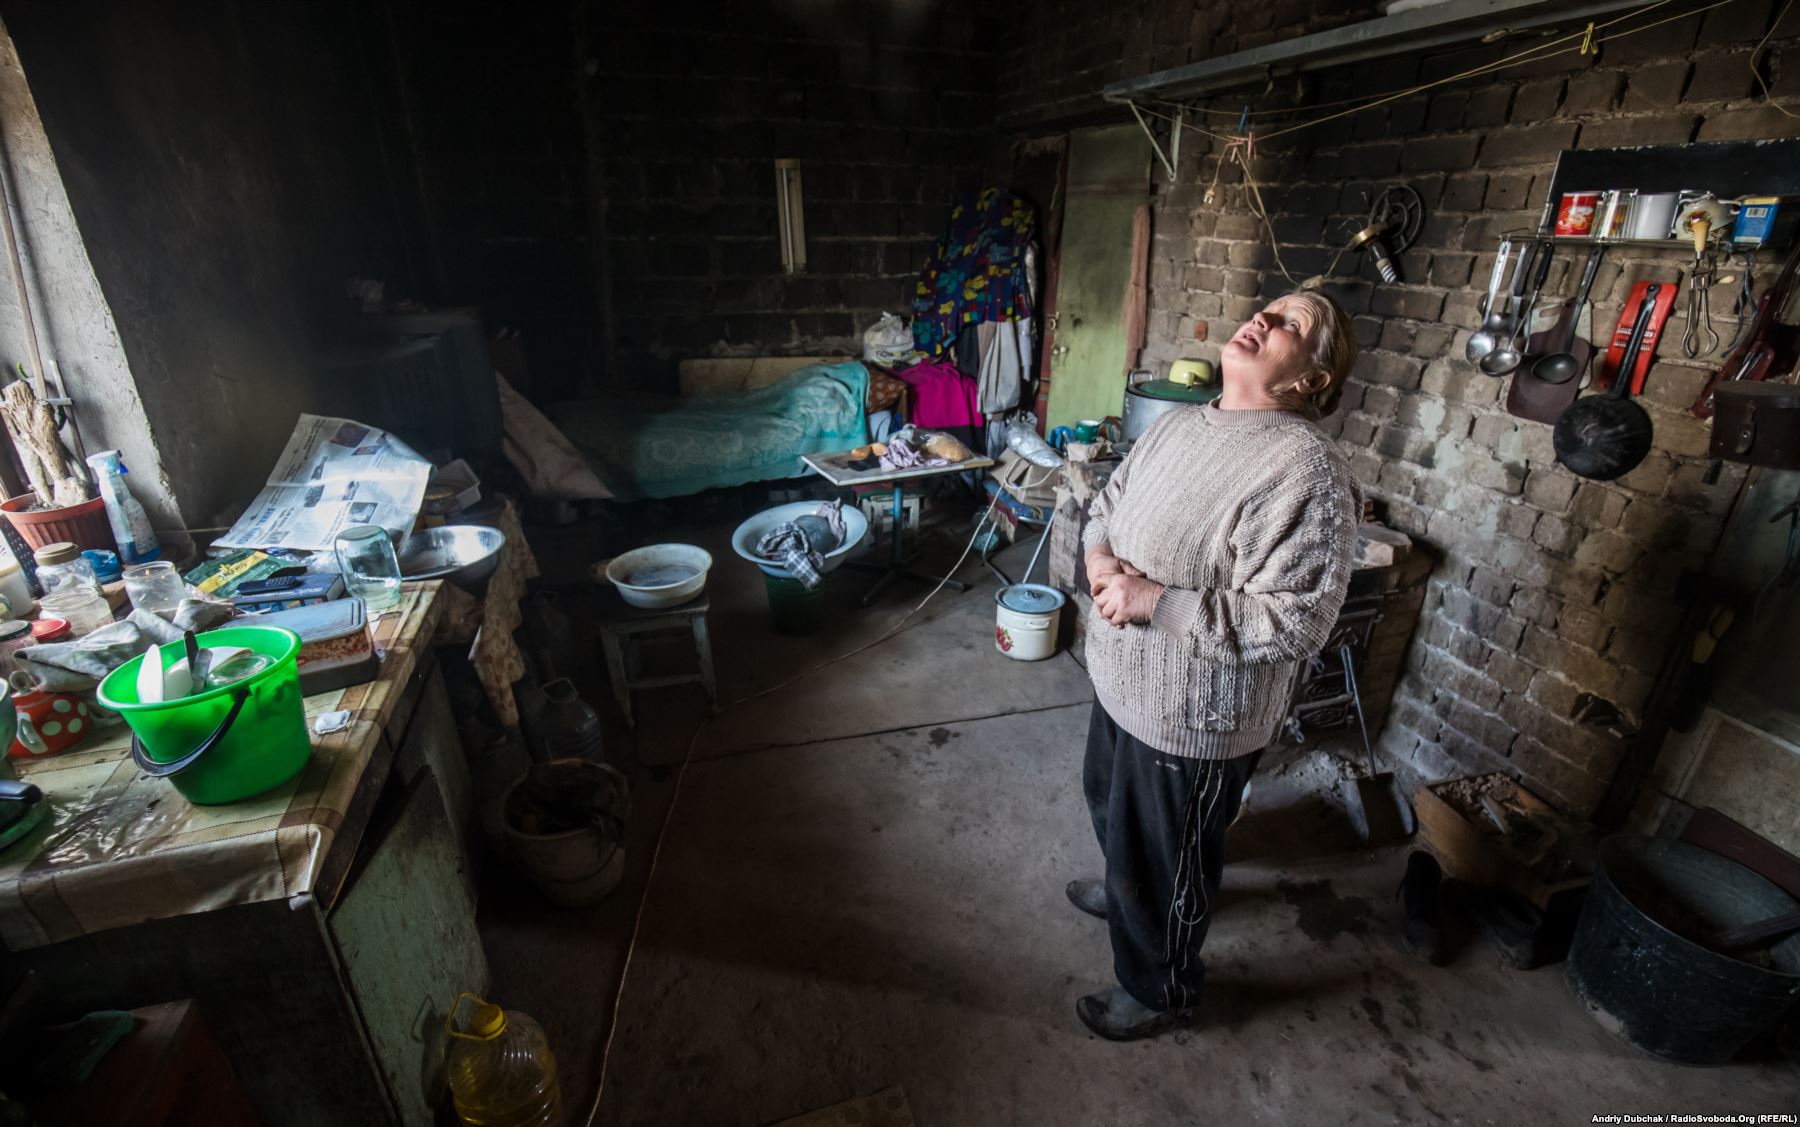 Zoya Kral lost her husband and son during the fighting. She now lives alone in Vodyane, surviving on handouts from the Ukrainian military and the Red Cross. Photo by: Andriy Dubchak